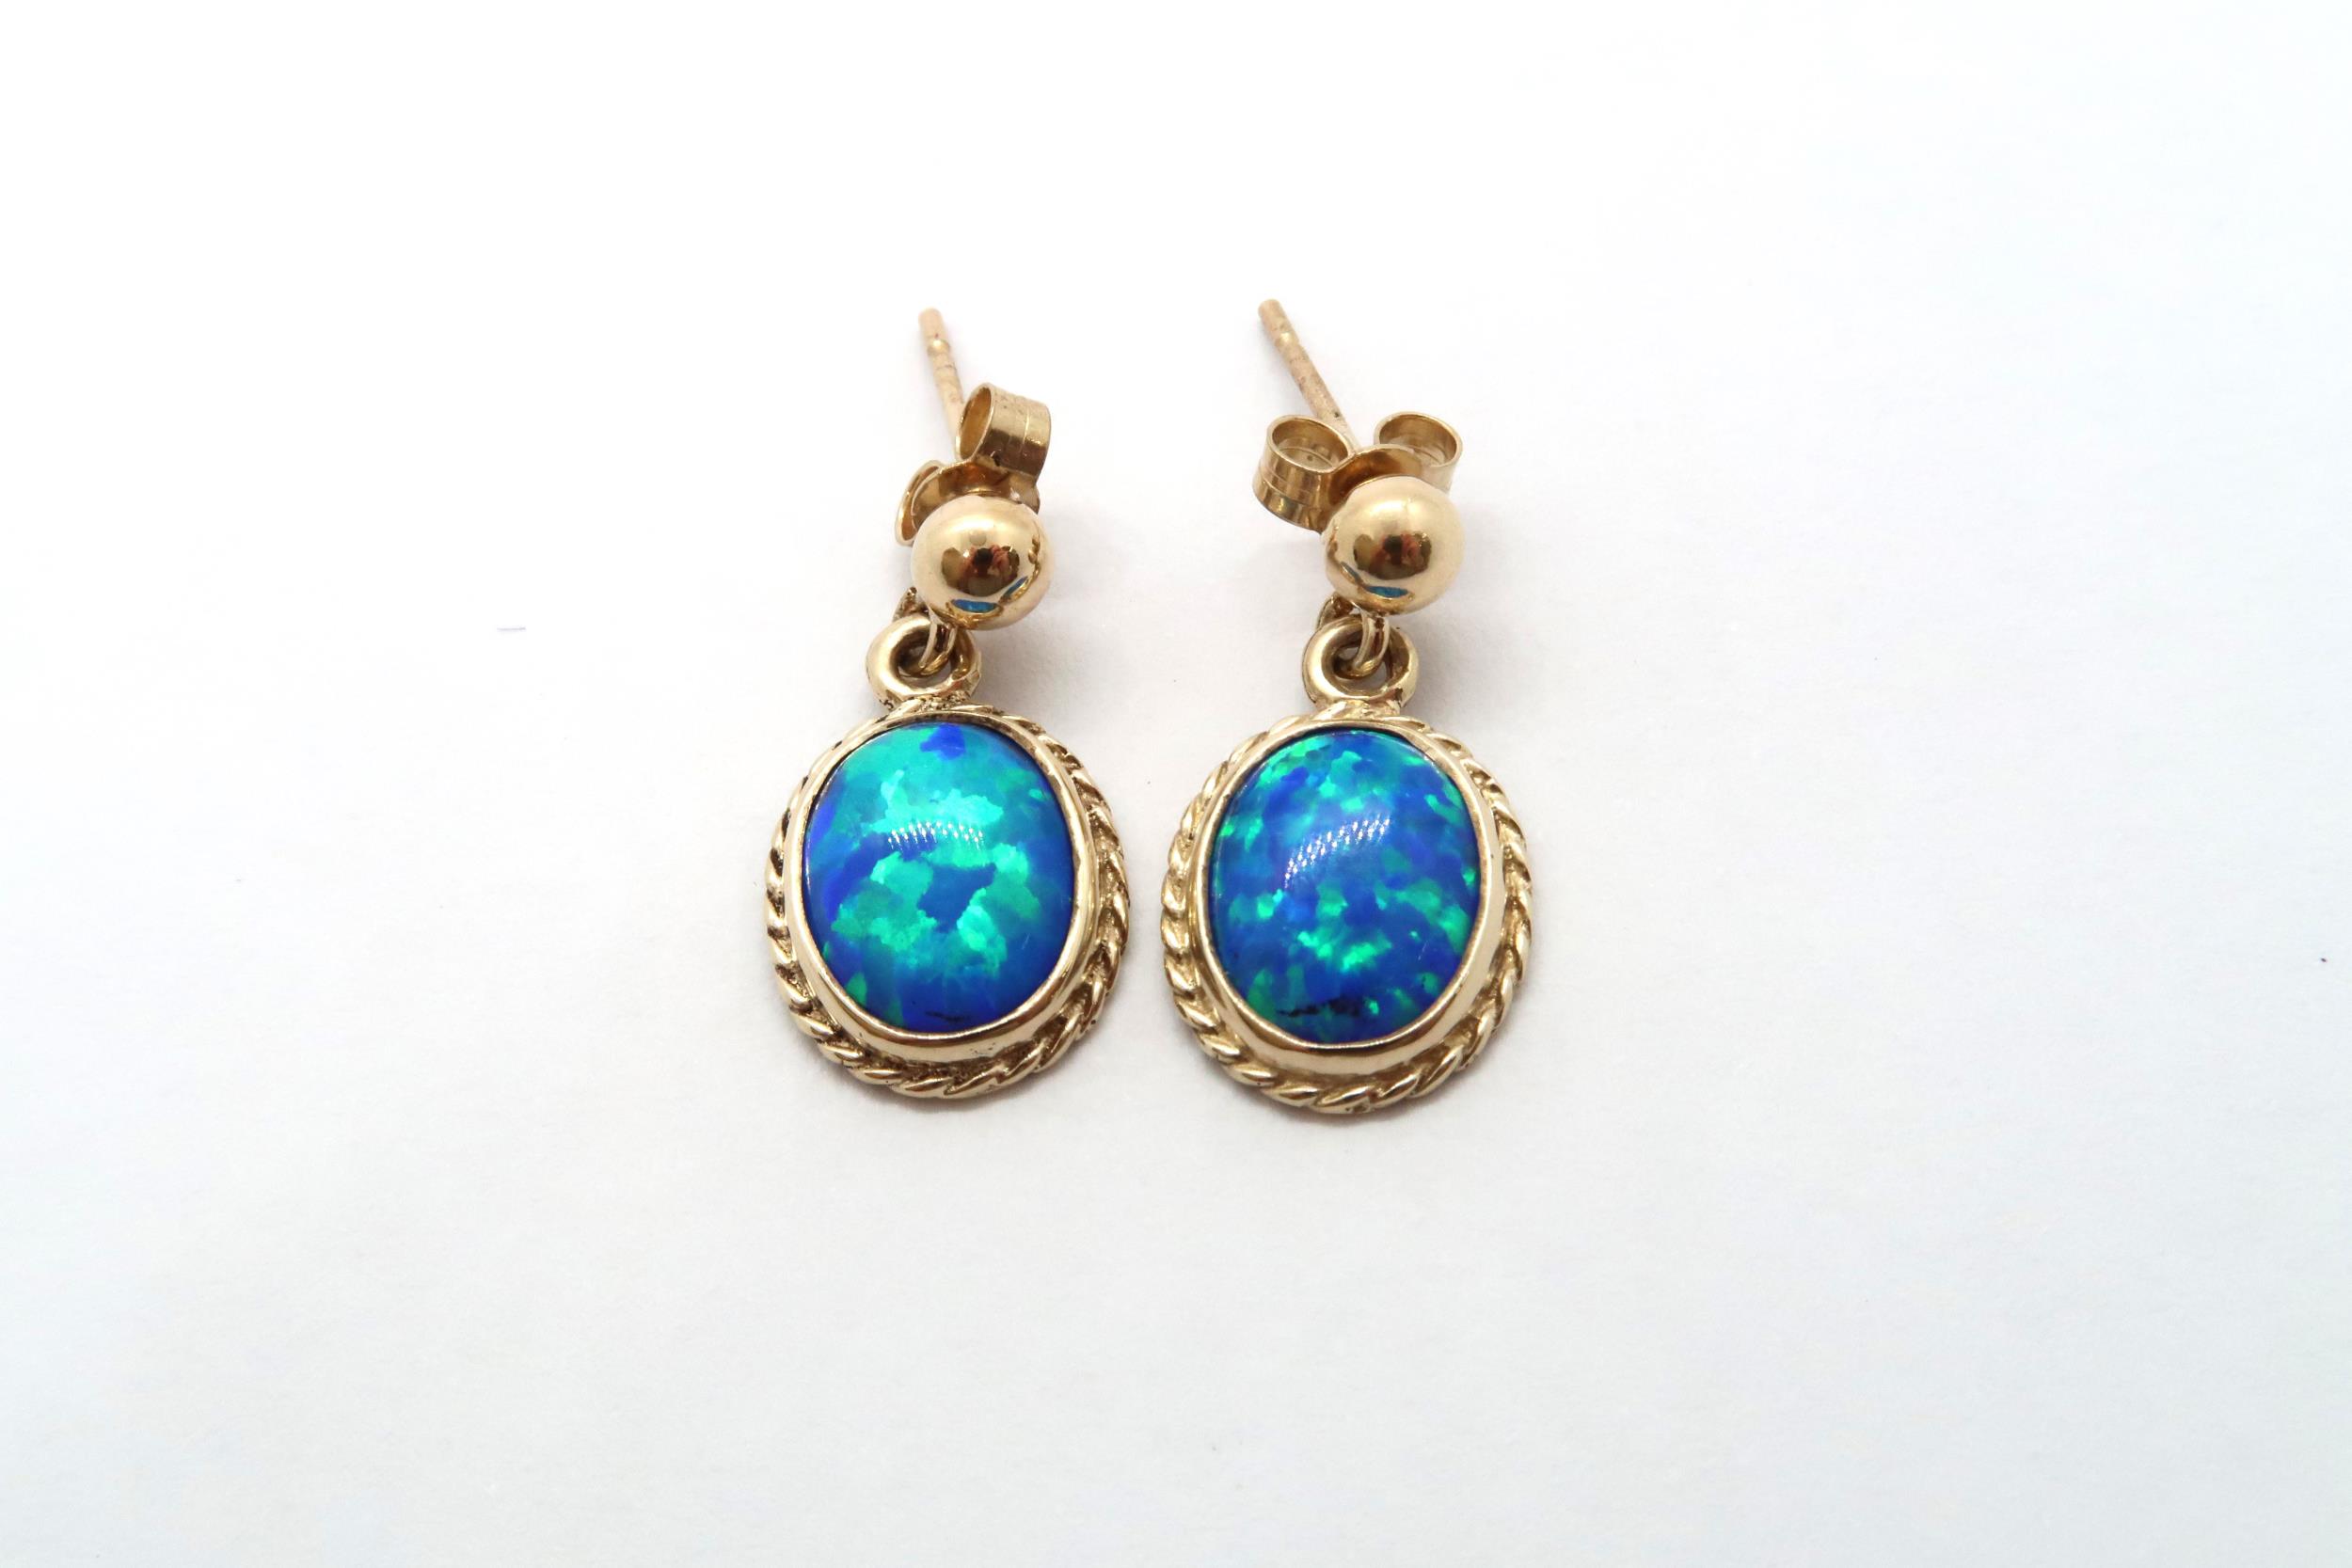 A 9ct yellow gold opal earrings, head size including ball mounts 20mm x 11mm